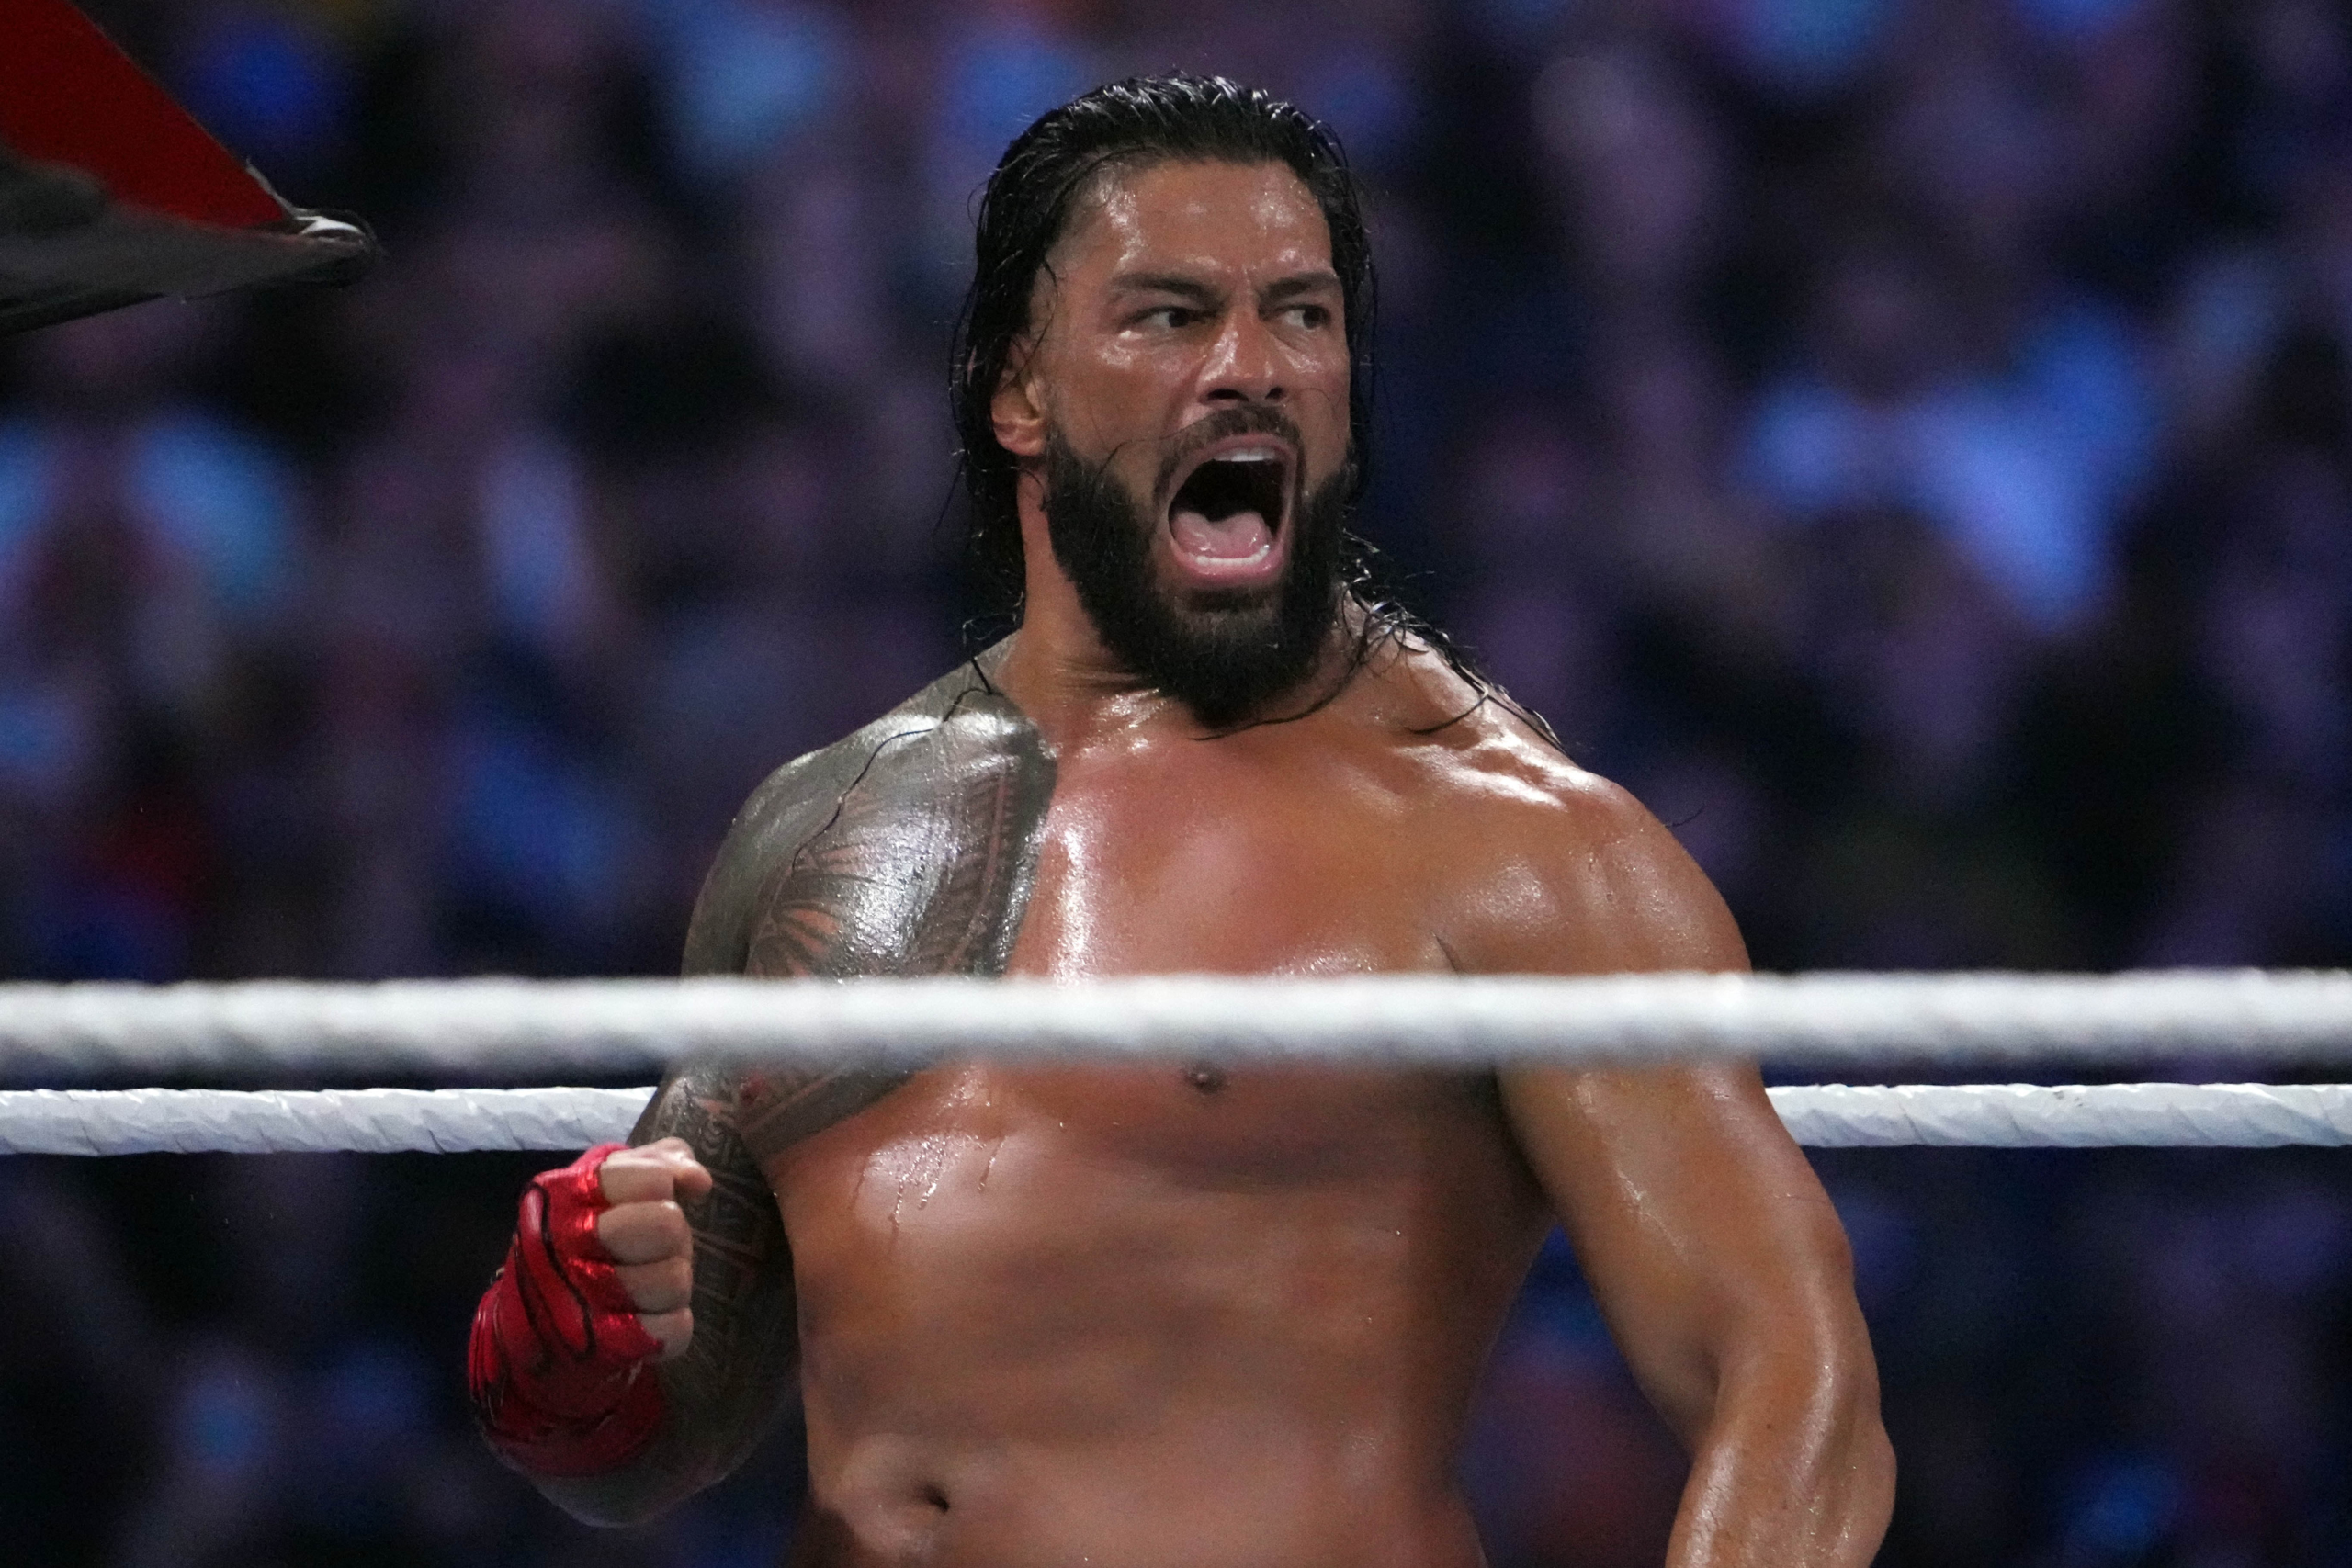 20 Best WWE Wrestlers of all time: From Roman Reigns to Hulk Hogan